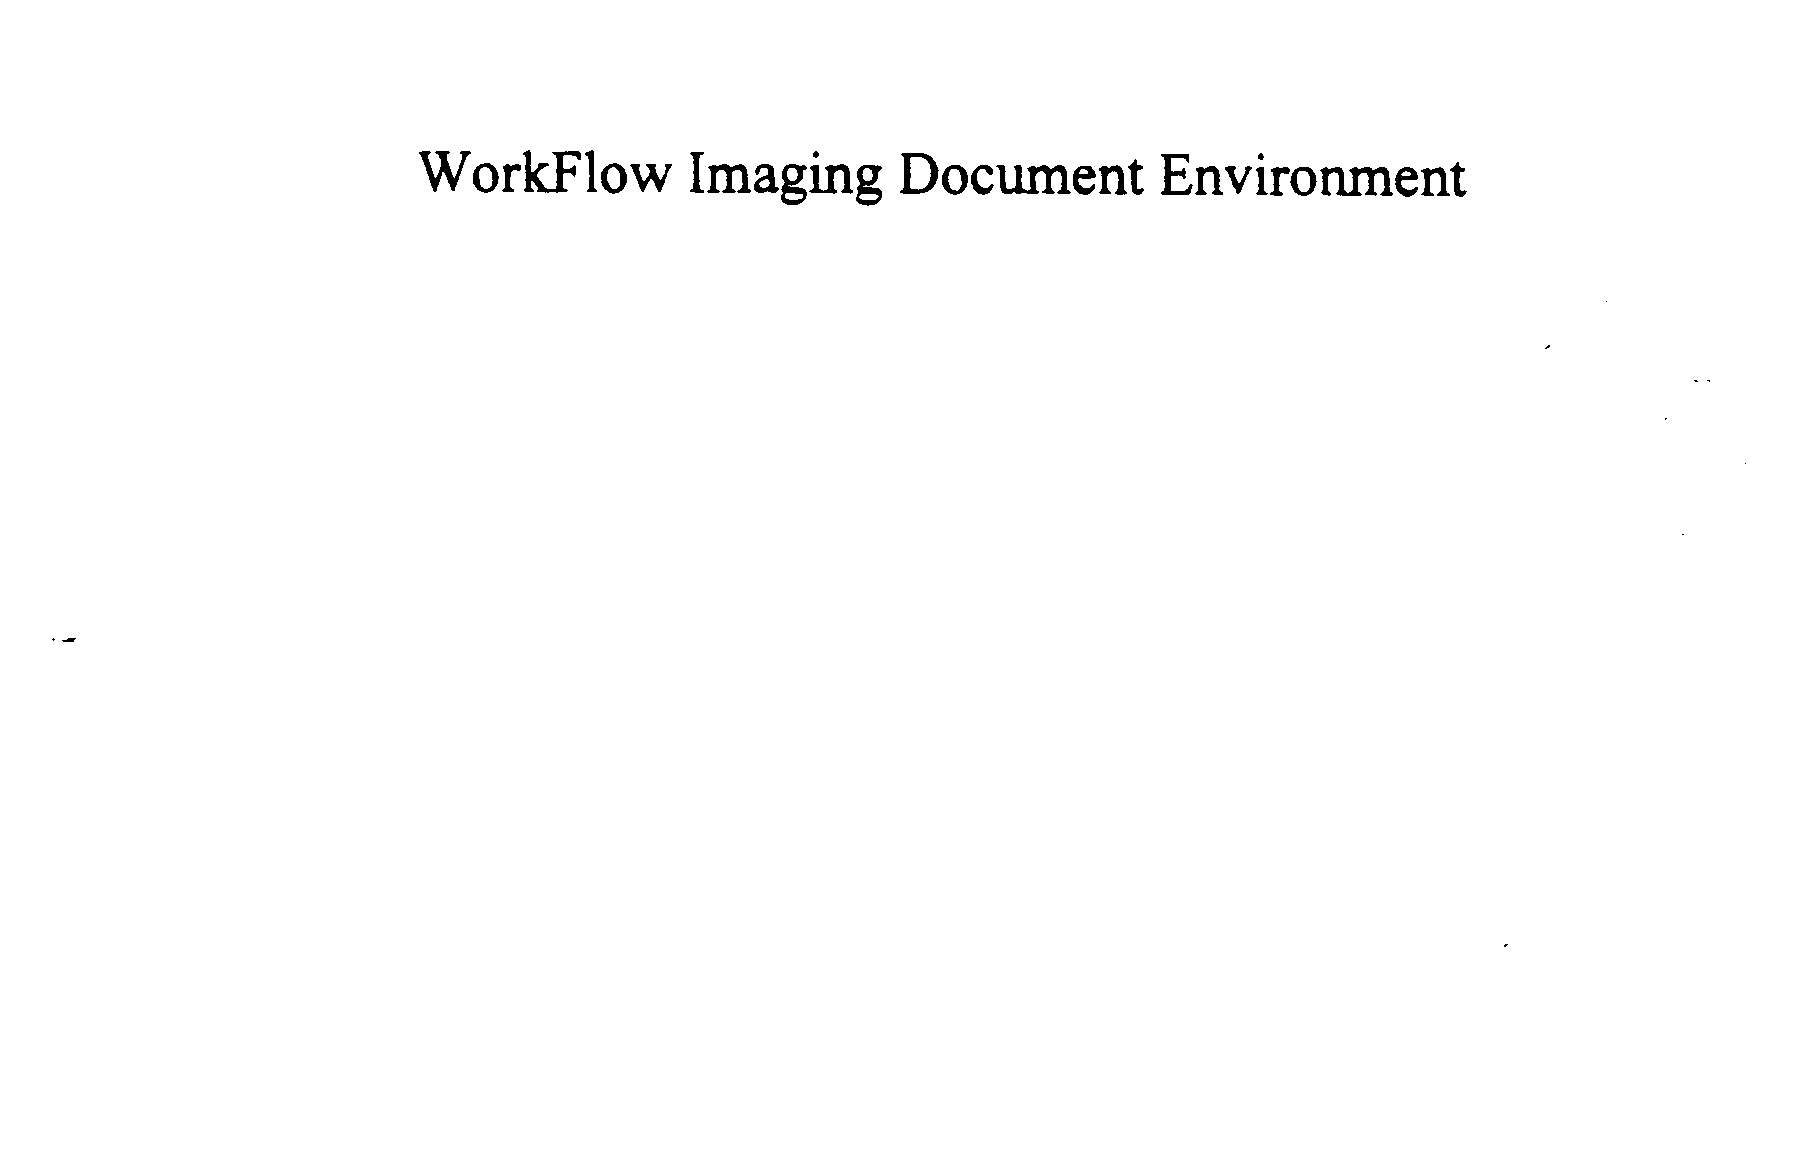  WORKFLOW IMAGING DOCUMENT ENVIRONMENT